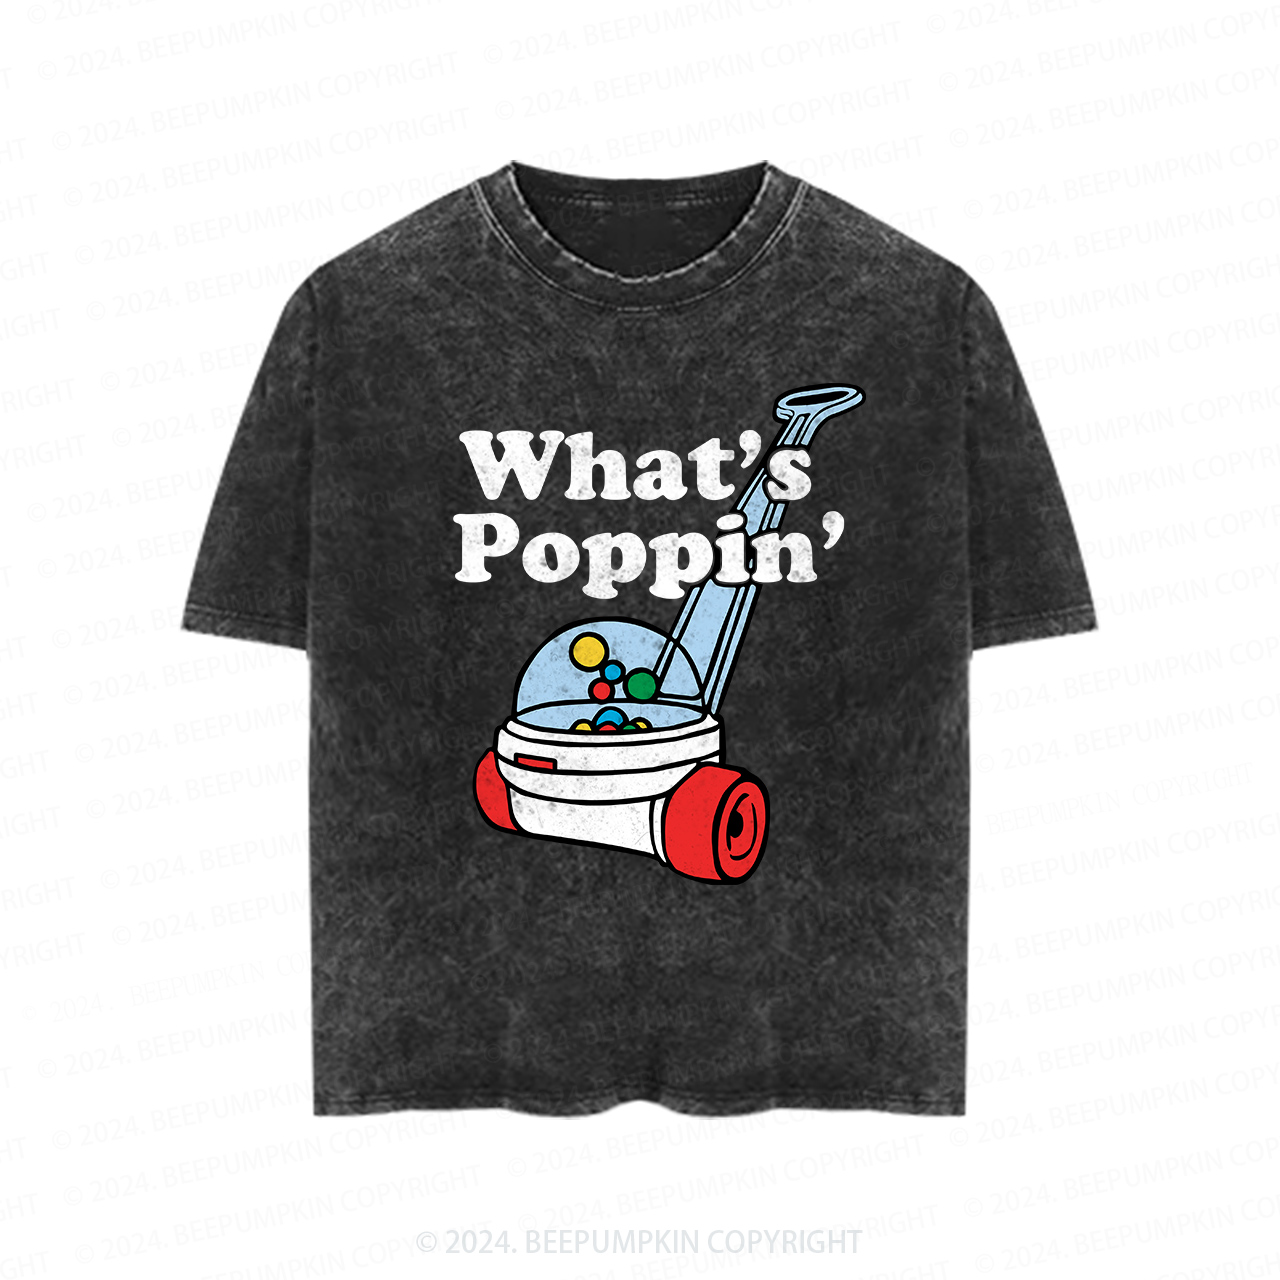 What's Poppin' Toddler&Kids Washed Tees